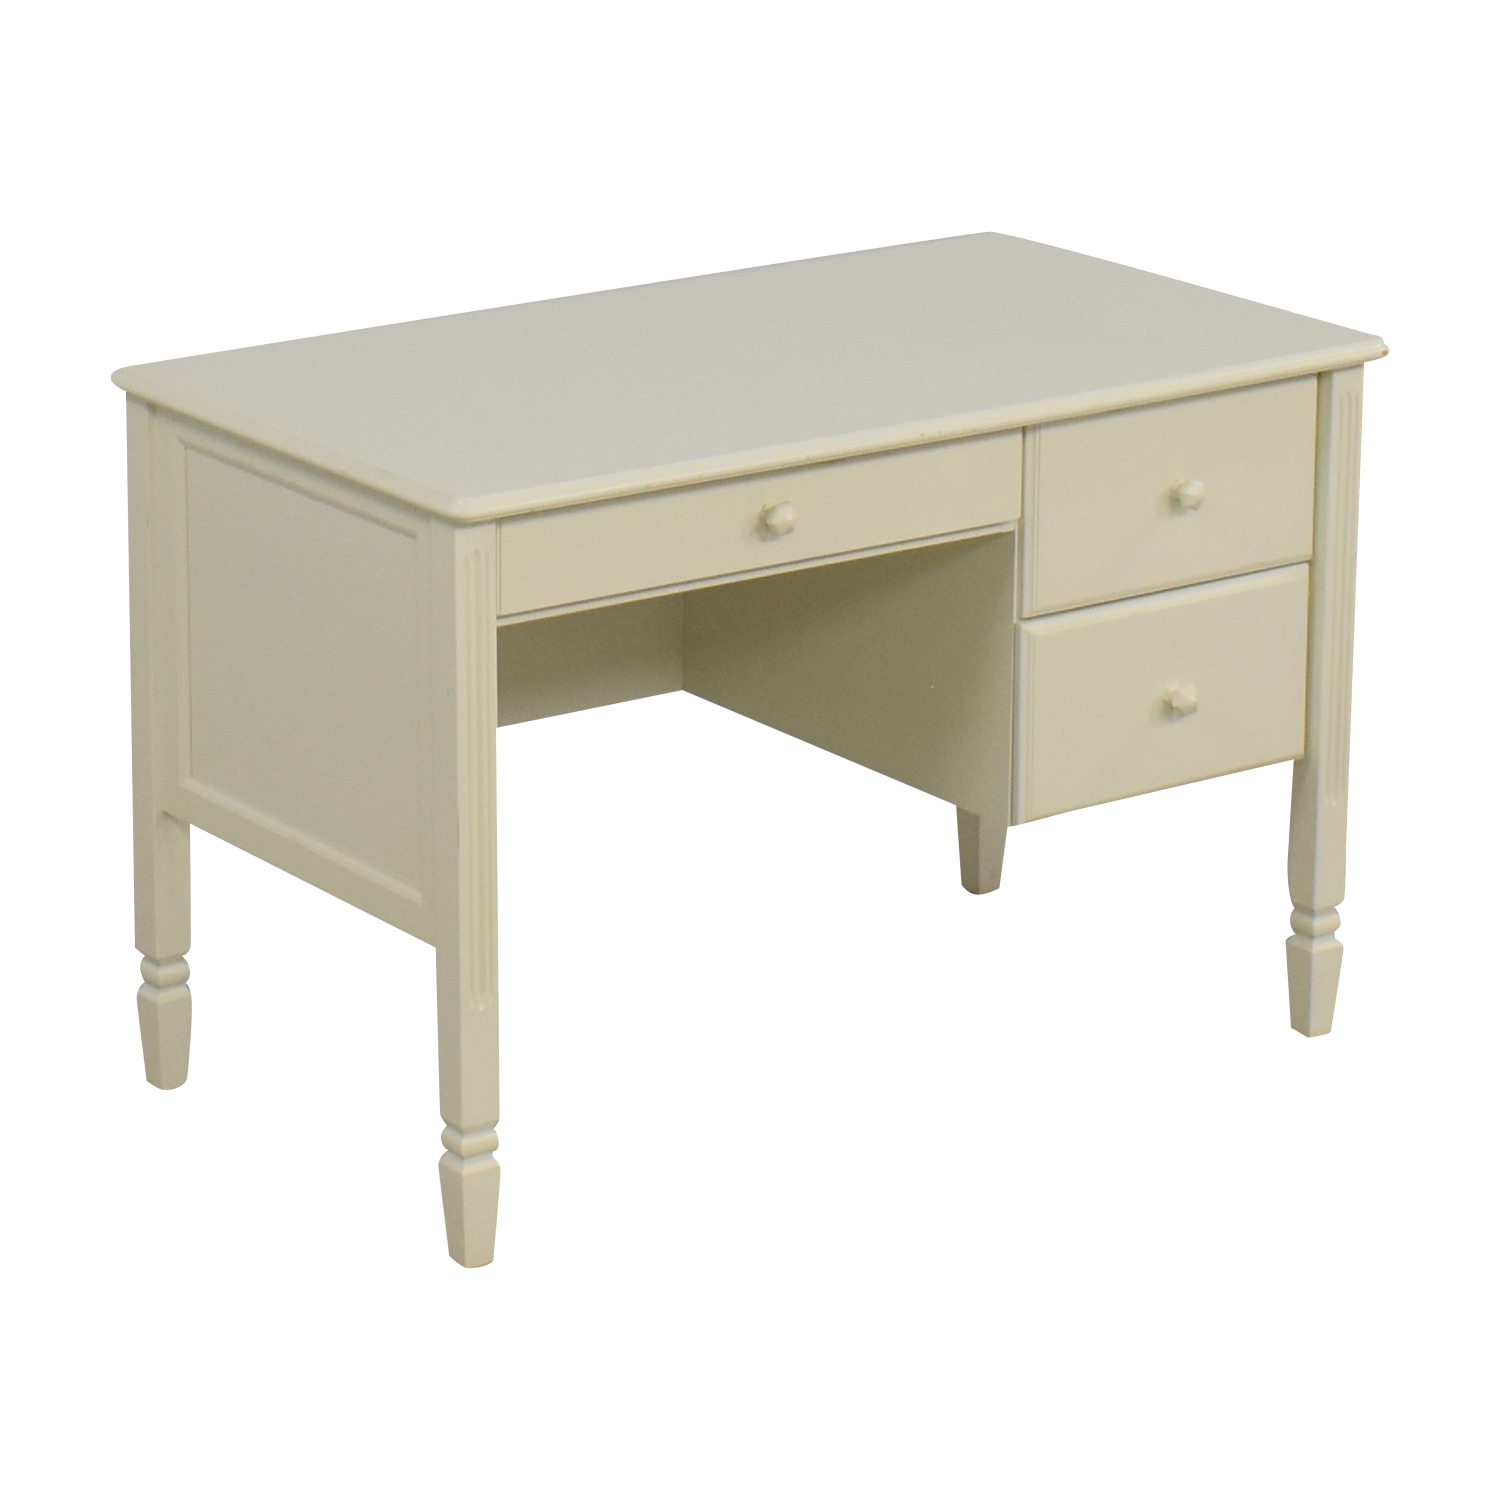 https://res.cloudinary.com/dkqtxtobb/image/upload/f_auto,q_auto:best,w_1500/product-assets/370220/pottery-barn-kids/tables/home-office-desks/used-pottery-barn-kids-madeline-storage-desk.jpeg